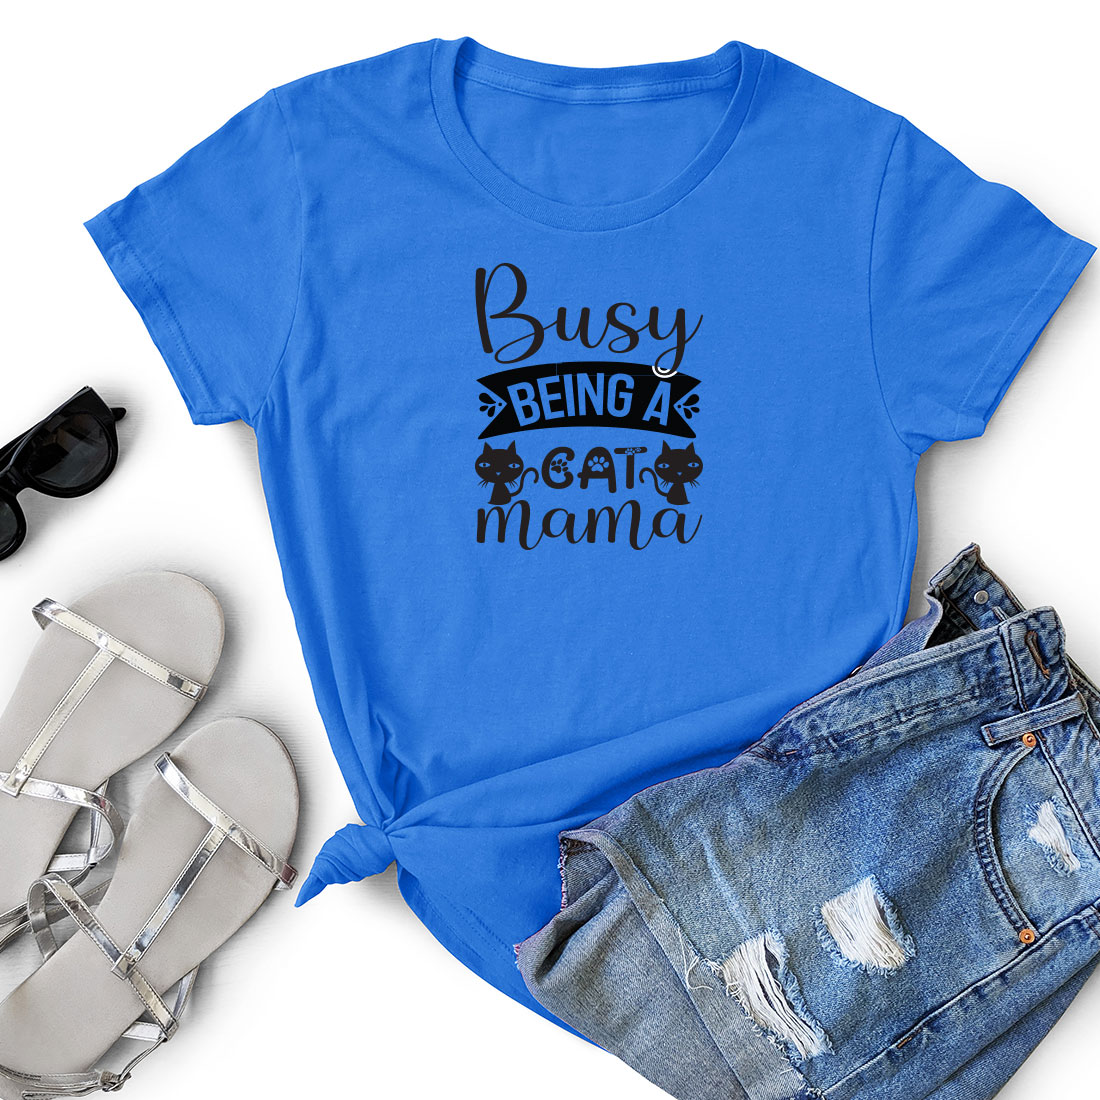 T - shirt that says busy being a cat mama.